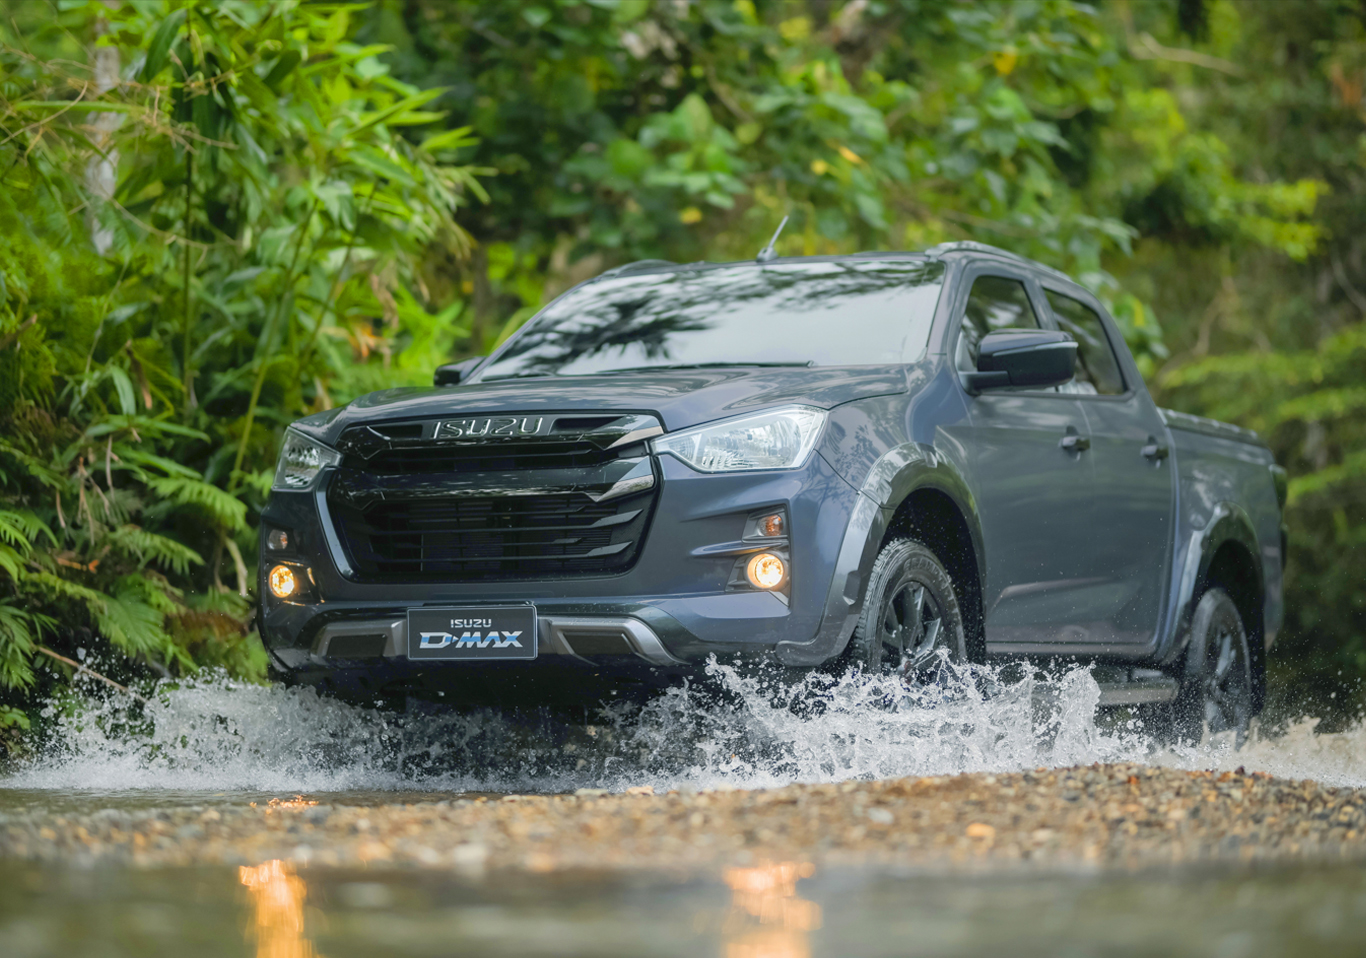 A gray Isuzu D-Max is seen being driven across a shallow pool of water in what appears to be an off-road location, with uneven ground and a background of green-leaved trees. The clear-white water around the truck's wheels are seen splashing towards all directions.